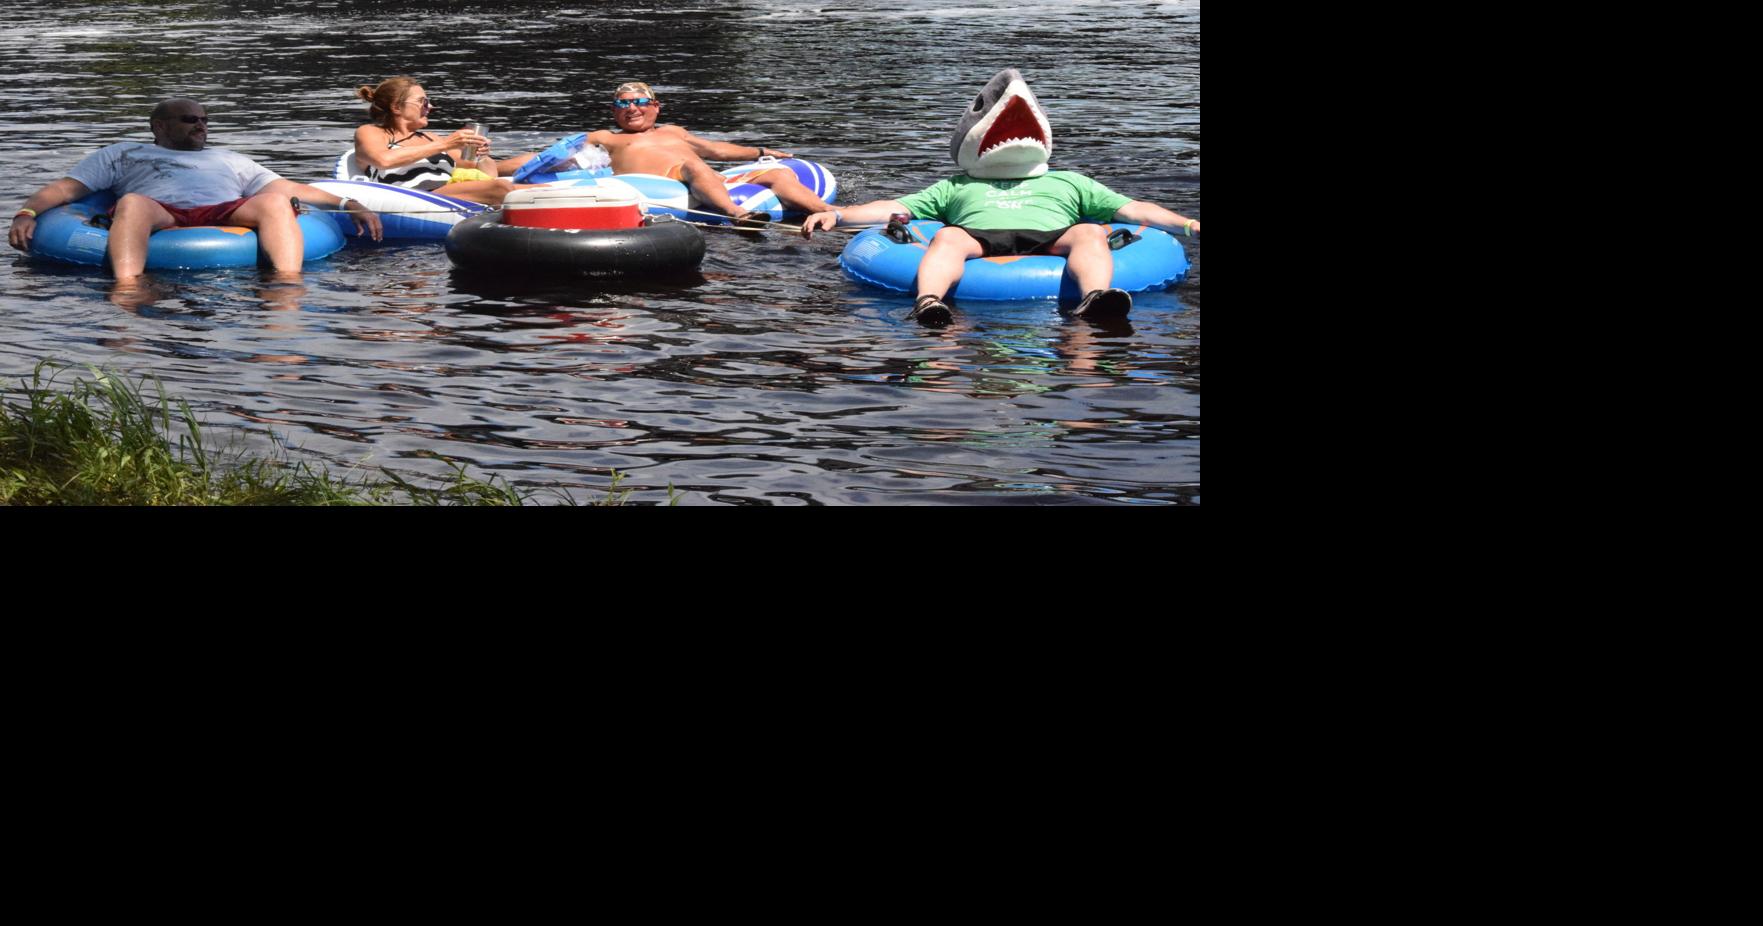 Floating down the Chippewa this year? Begin your FATFAR experience at a